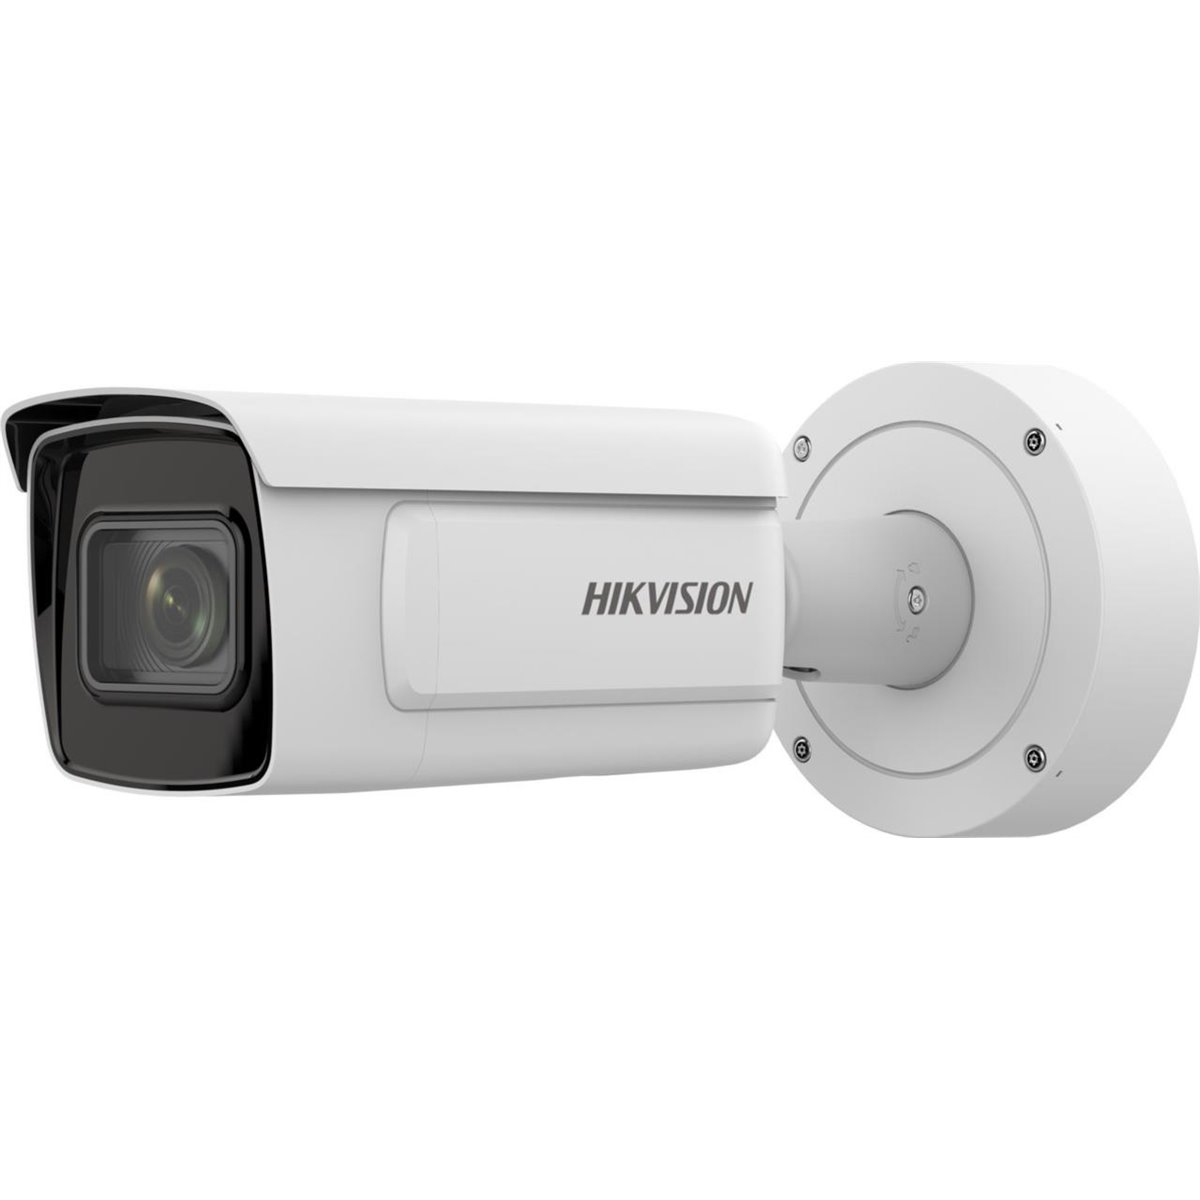 Hikvision iDS-2CD7A46G0-P-IZHSY 2.8-12mm - Network Camera